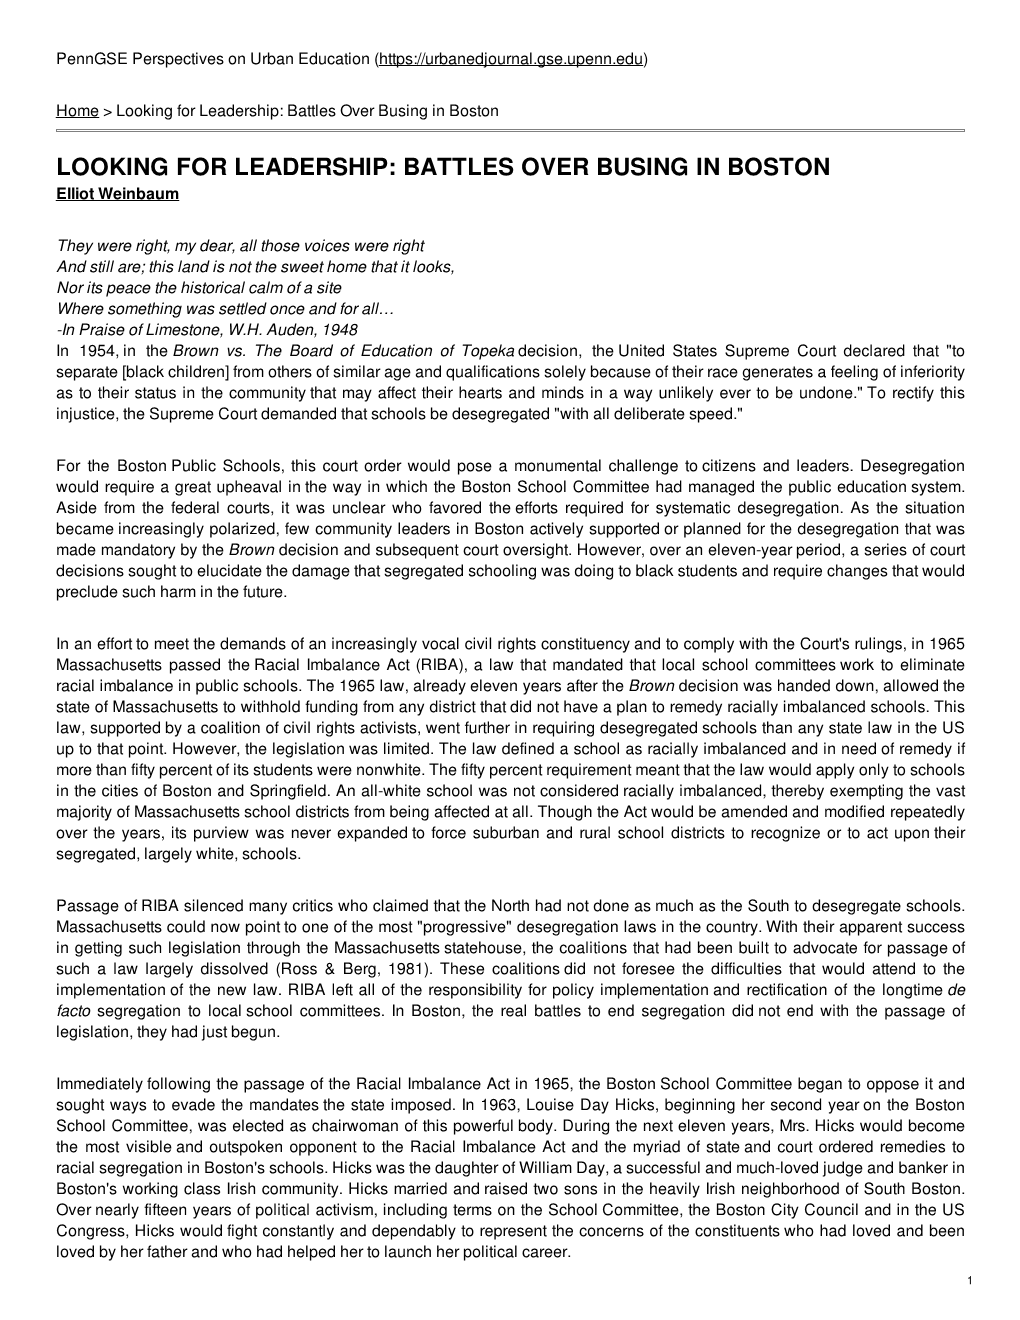 Looking for Leadership: Battles Over Busing in Boston